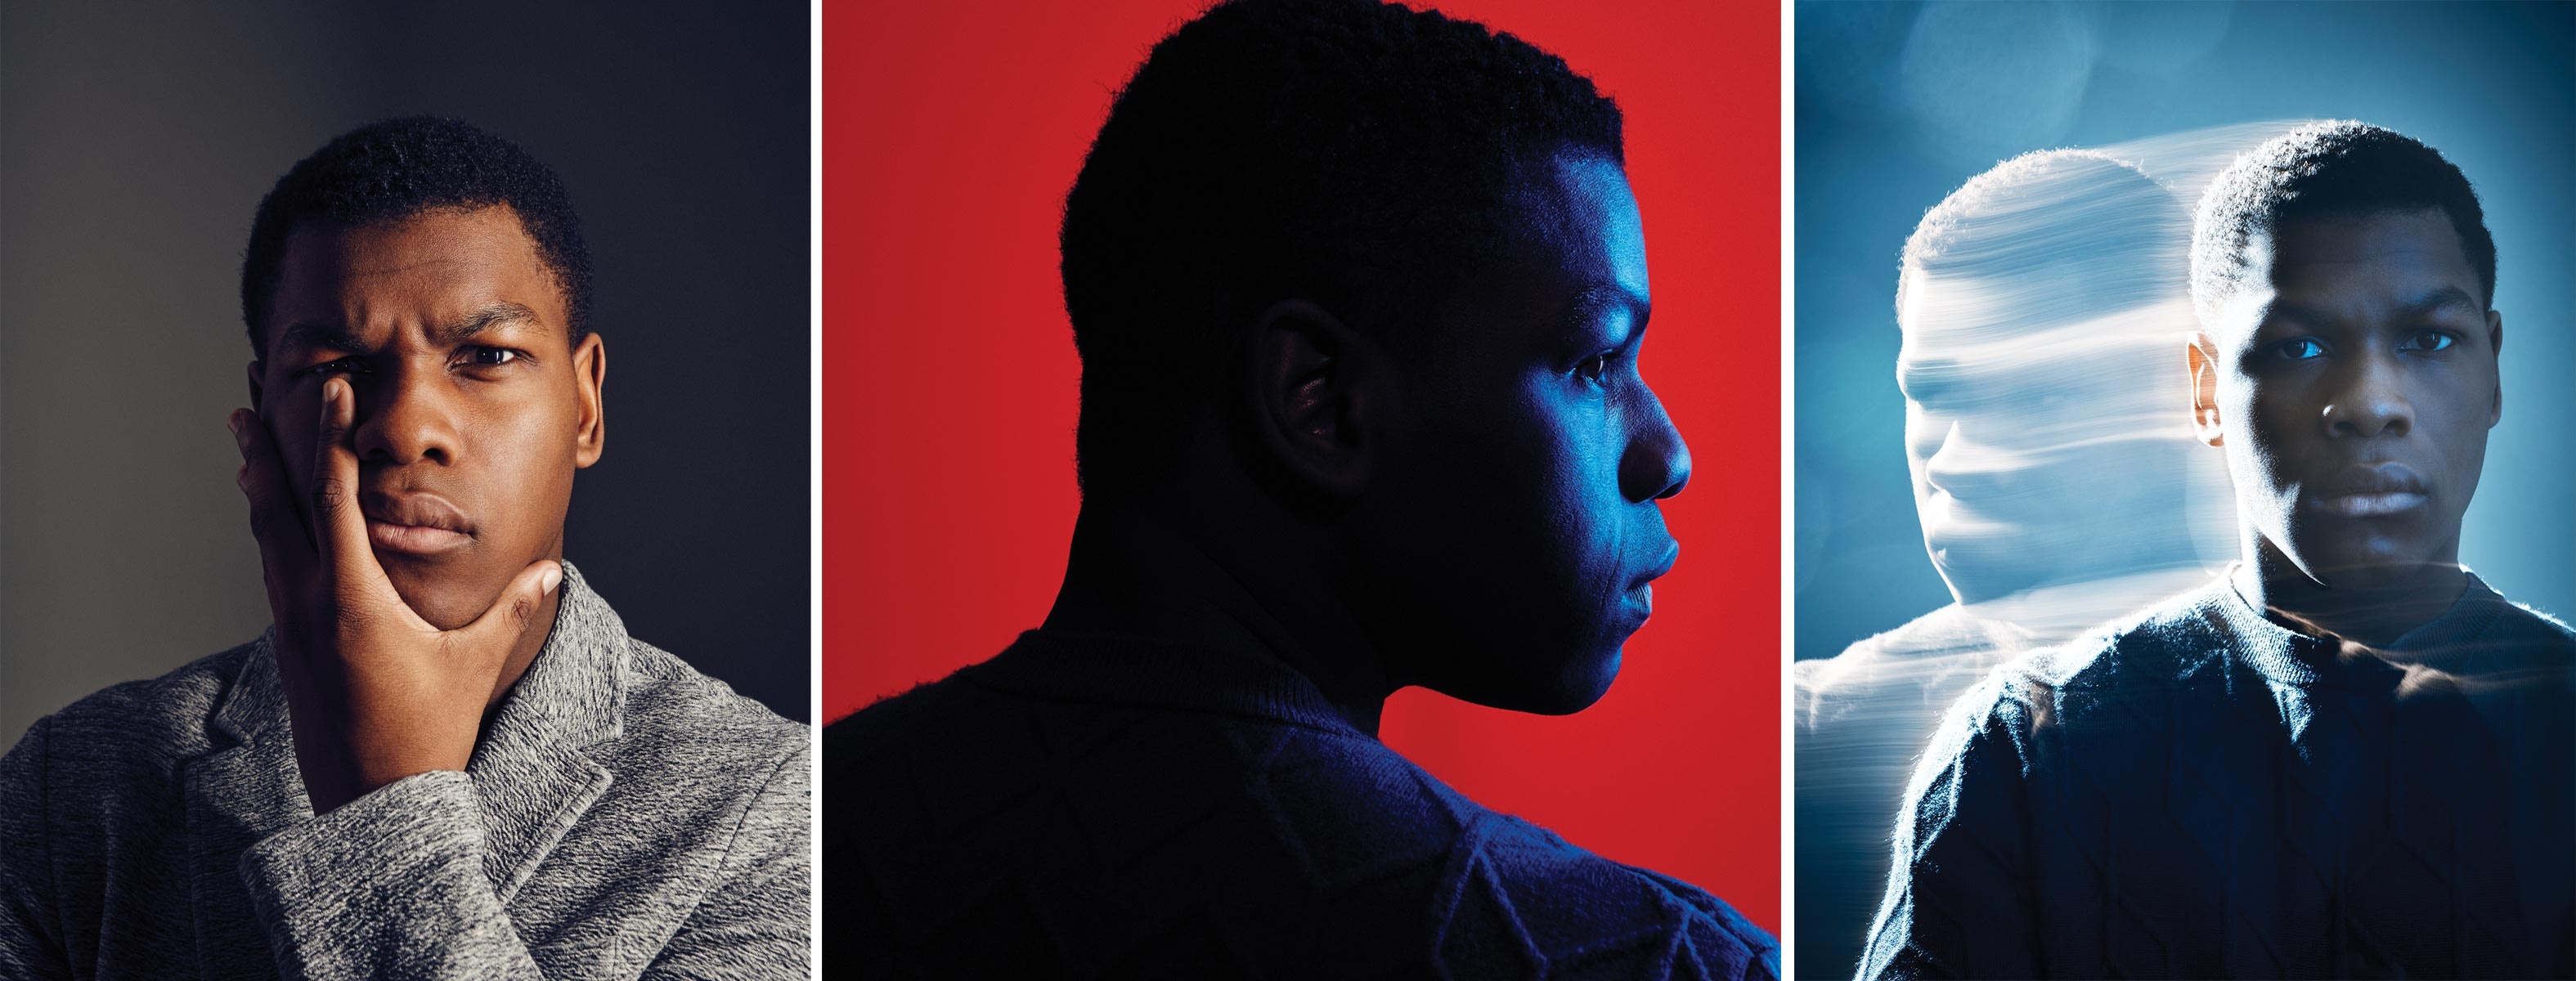 John Boyega Is the ‘Star Wars’ Hero You’re Looking For